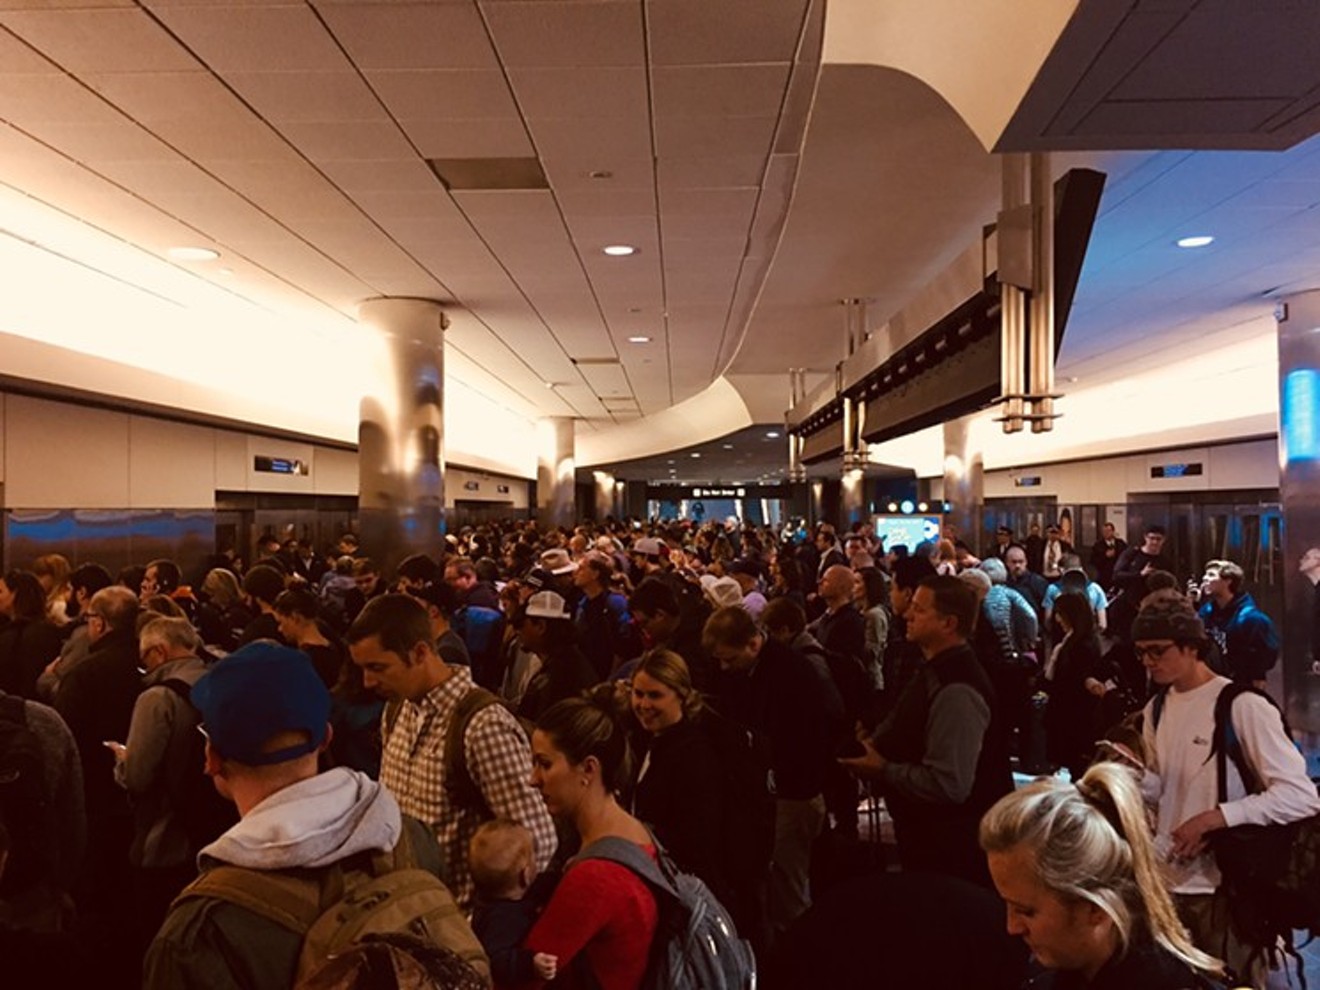 DIA on the Wednesday before Thanksgiving.